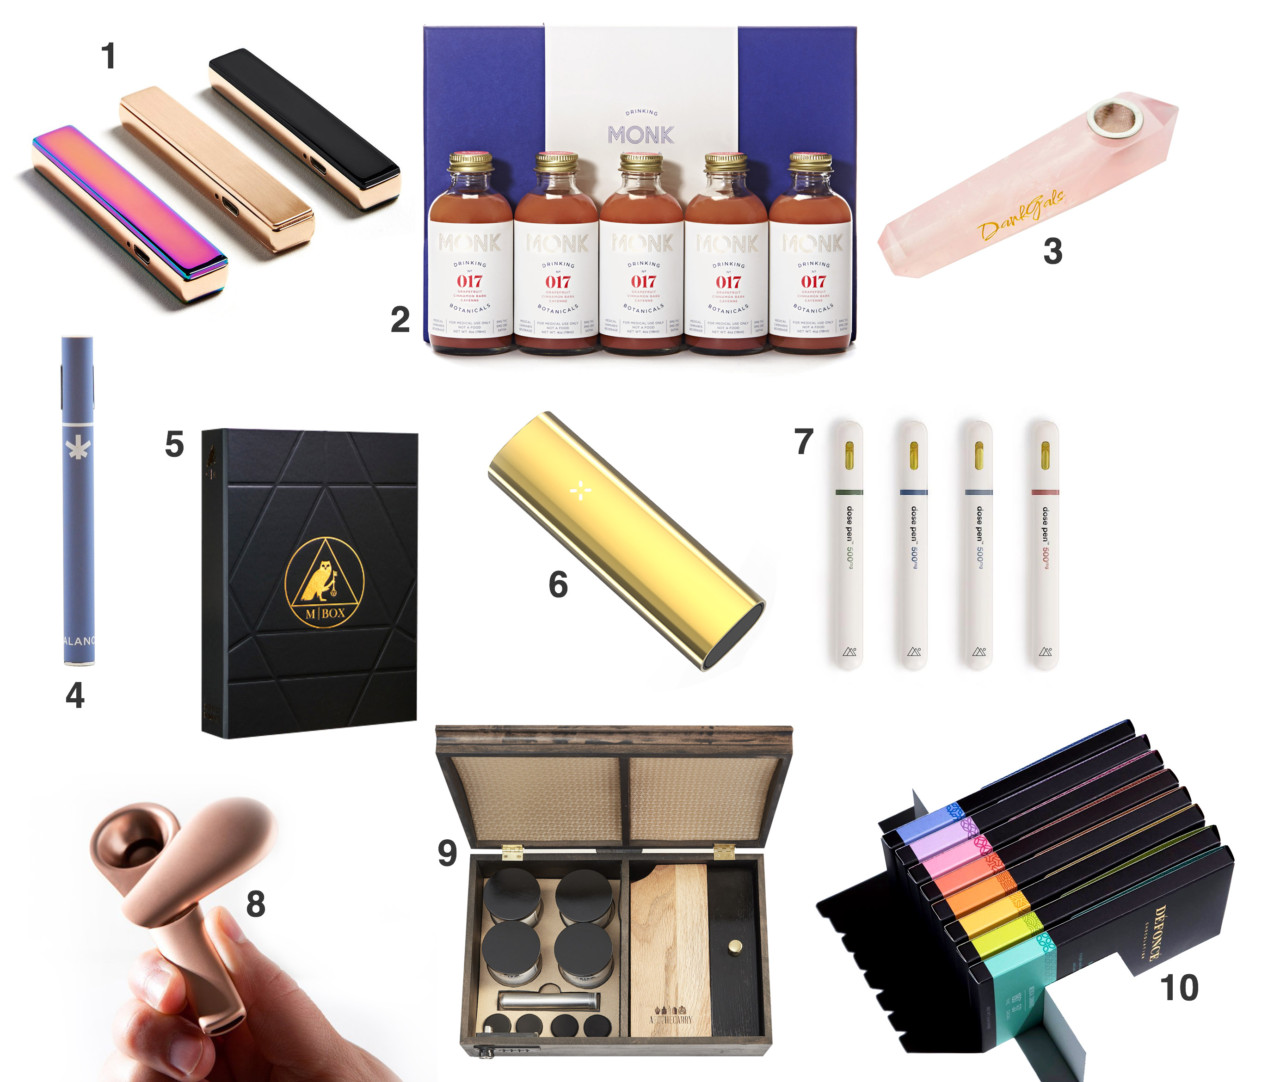 10 More Designer Cannabis Goods For the Cannaseur